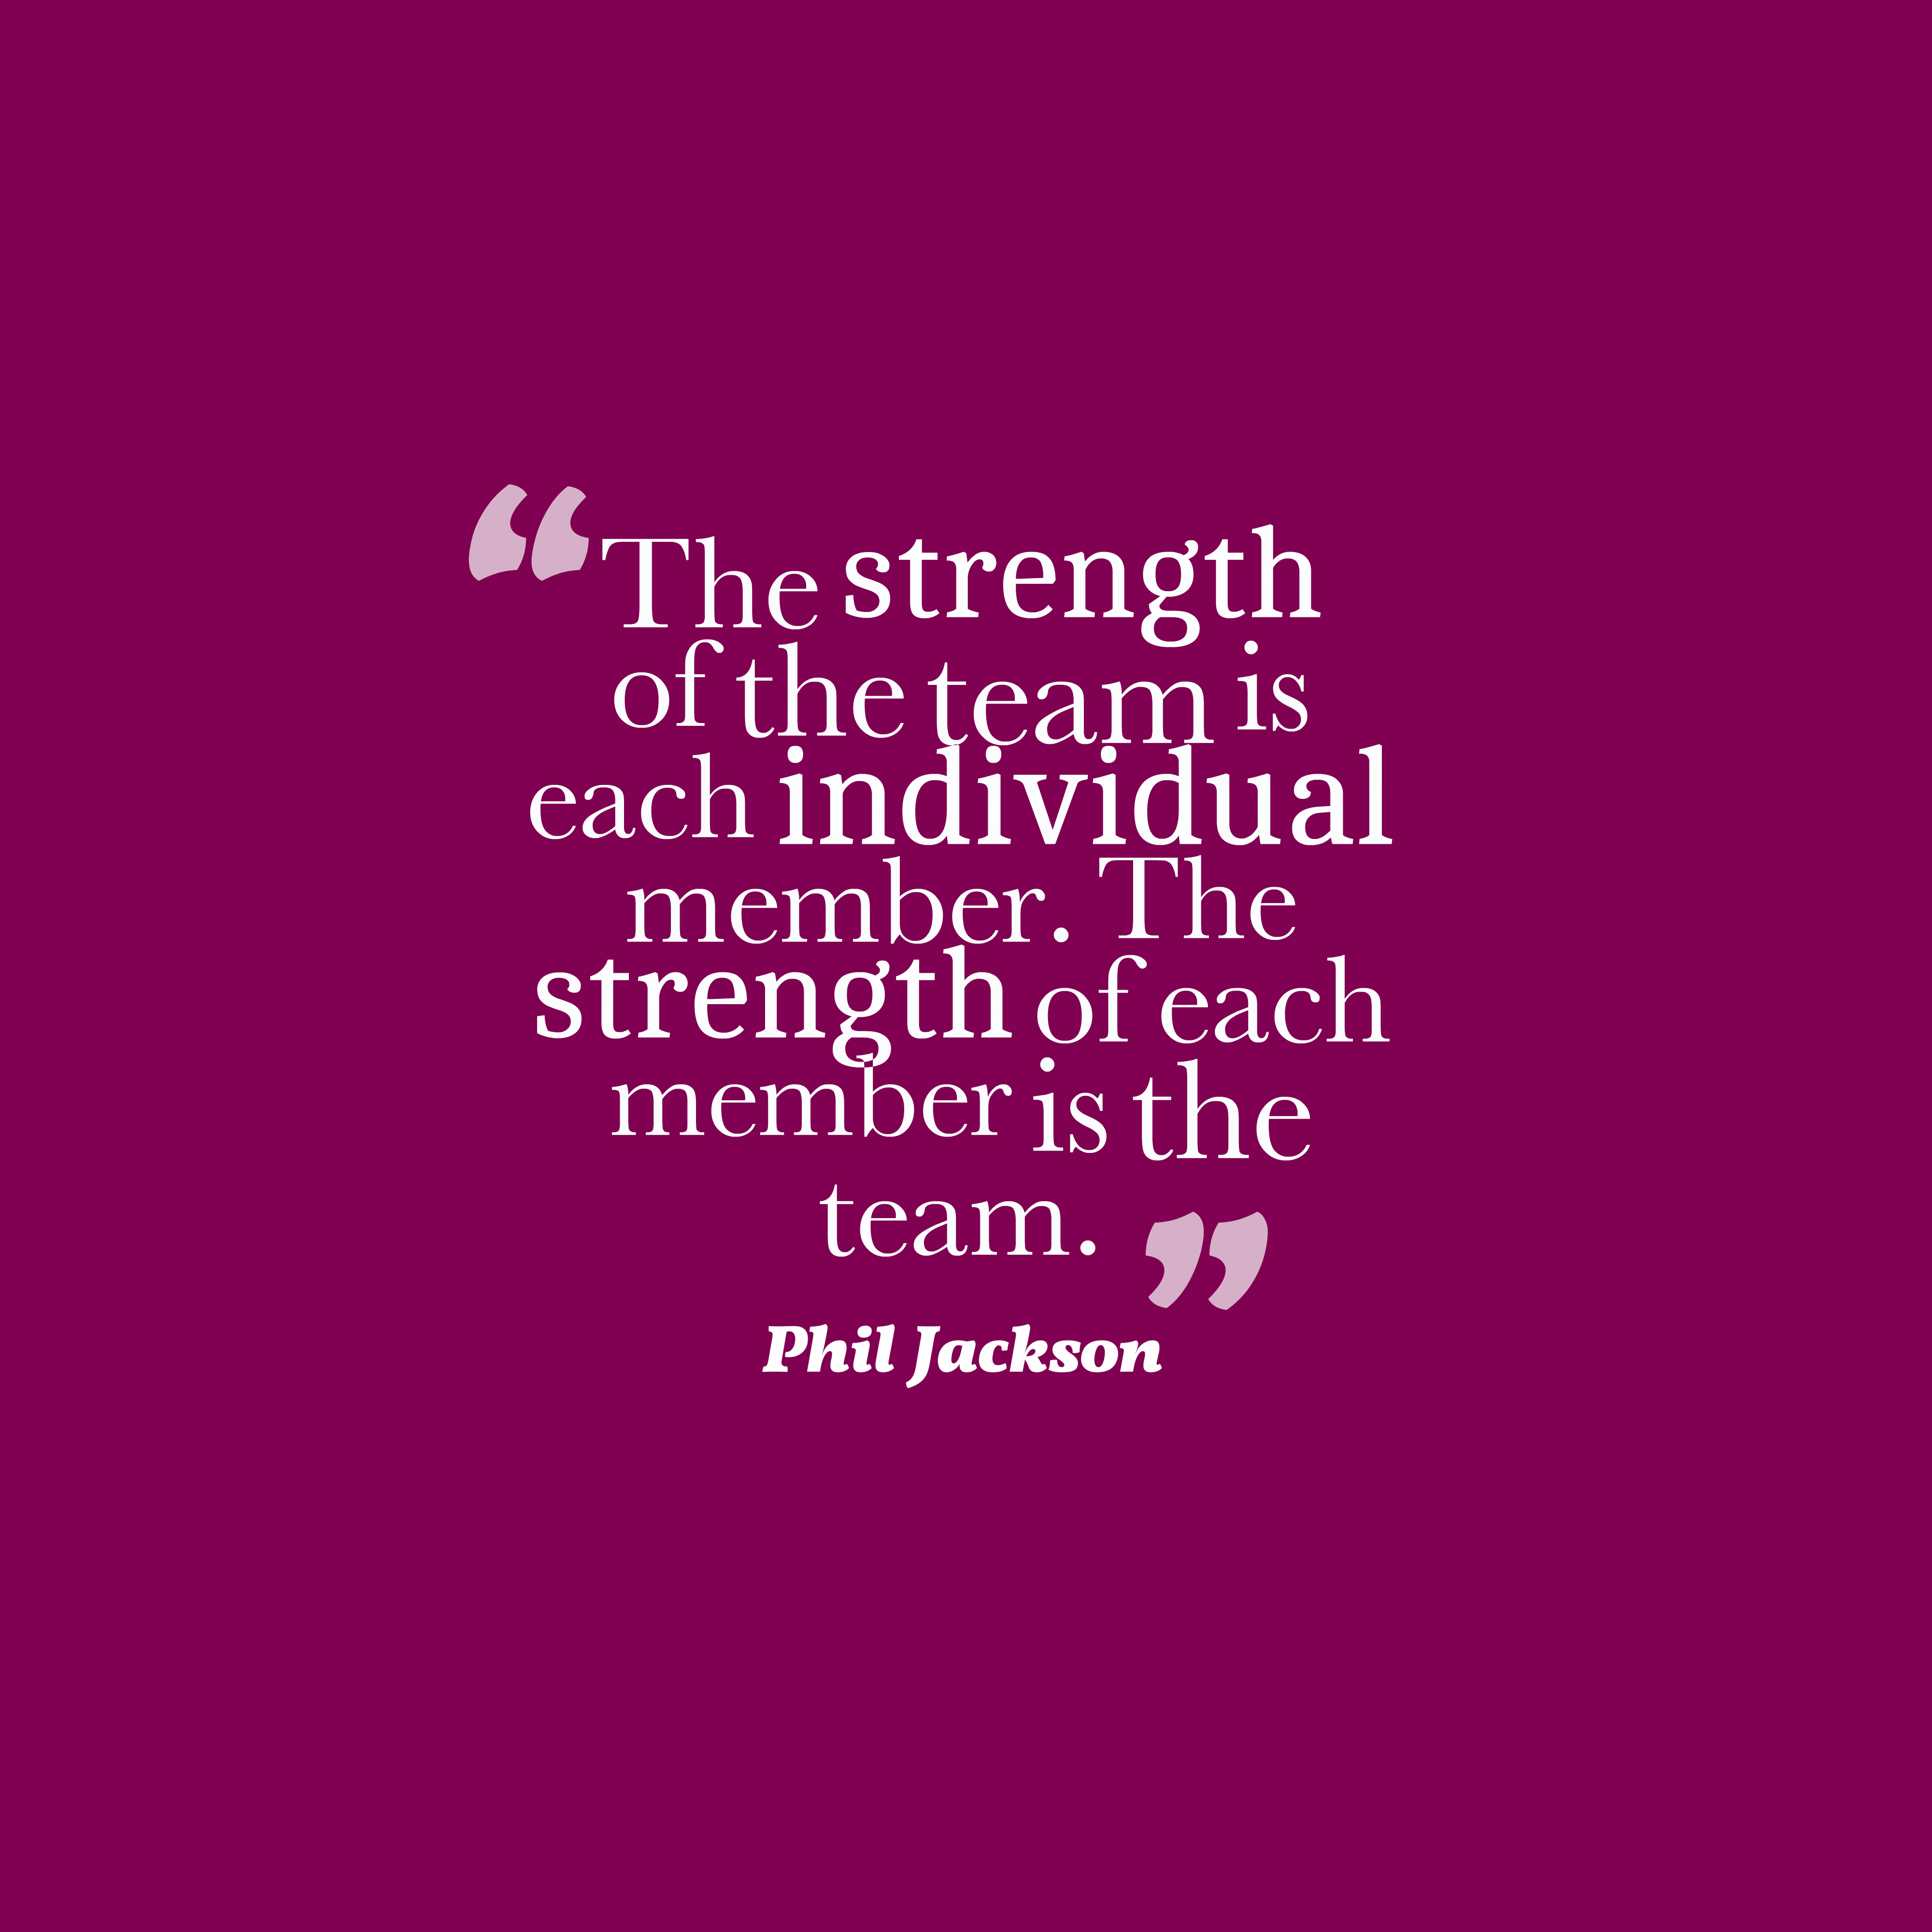 Each individual. Quote about Team. Team quotes. Teamwork quotes. Strength member.